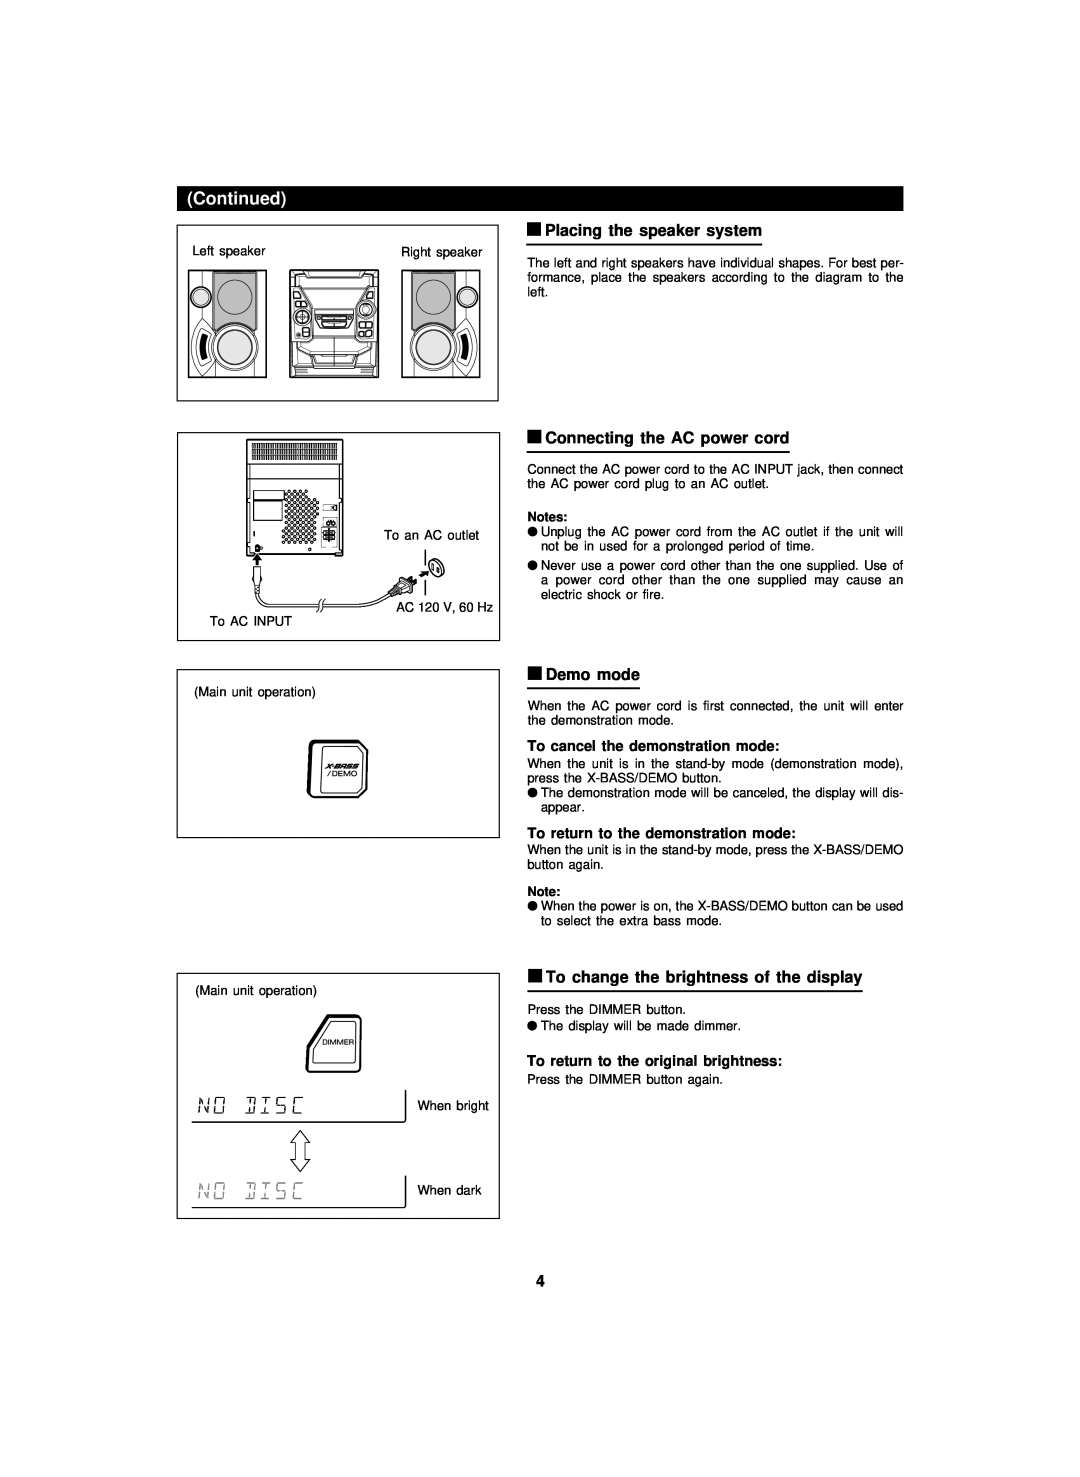 Sharp CD-BA1600 operation manual Continued, To cancel the demonstration mode, To return to the demonstration mode 